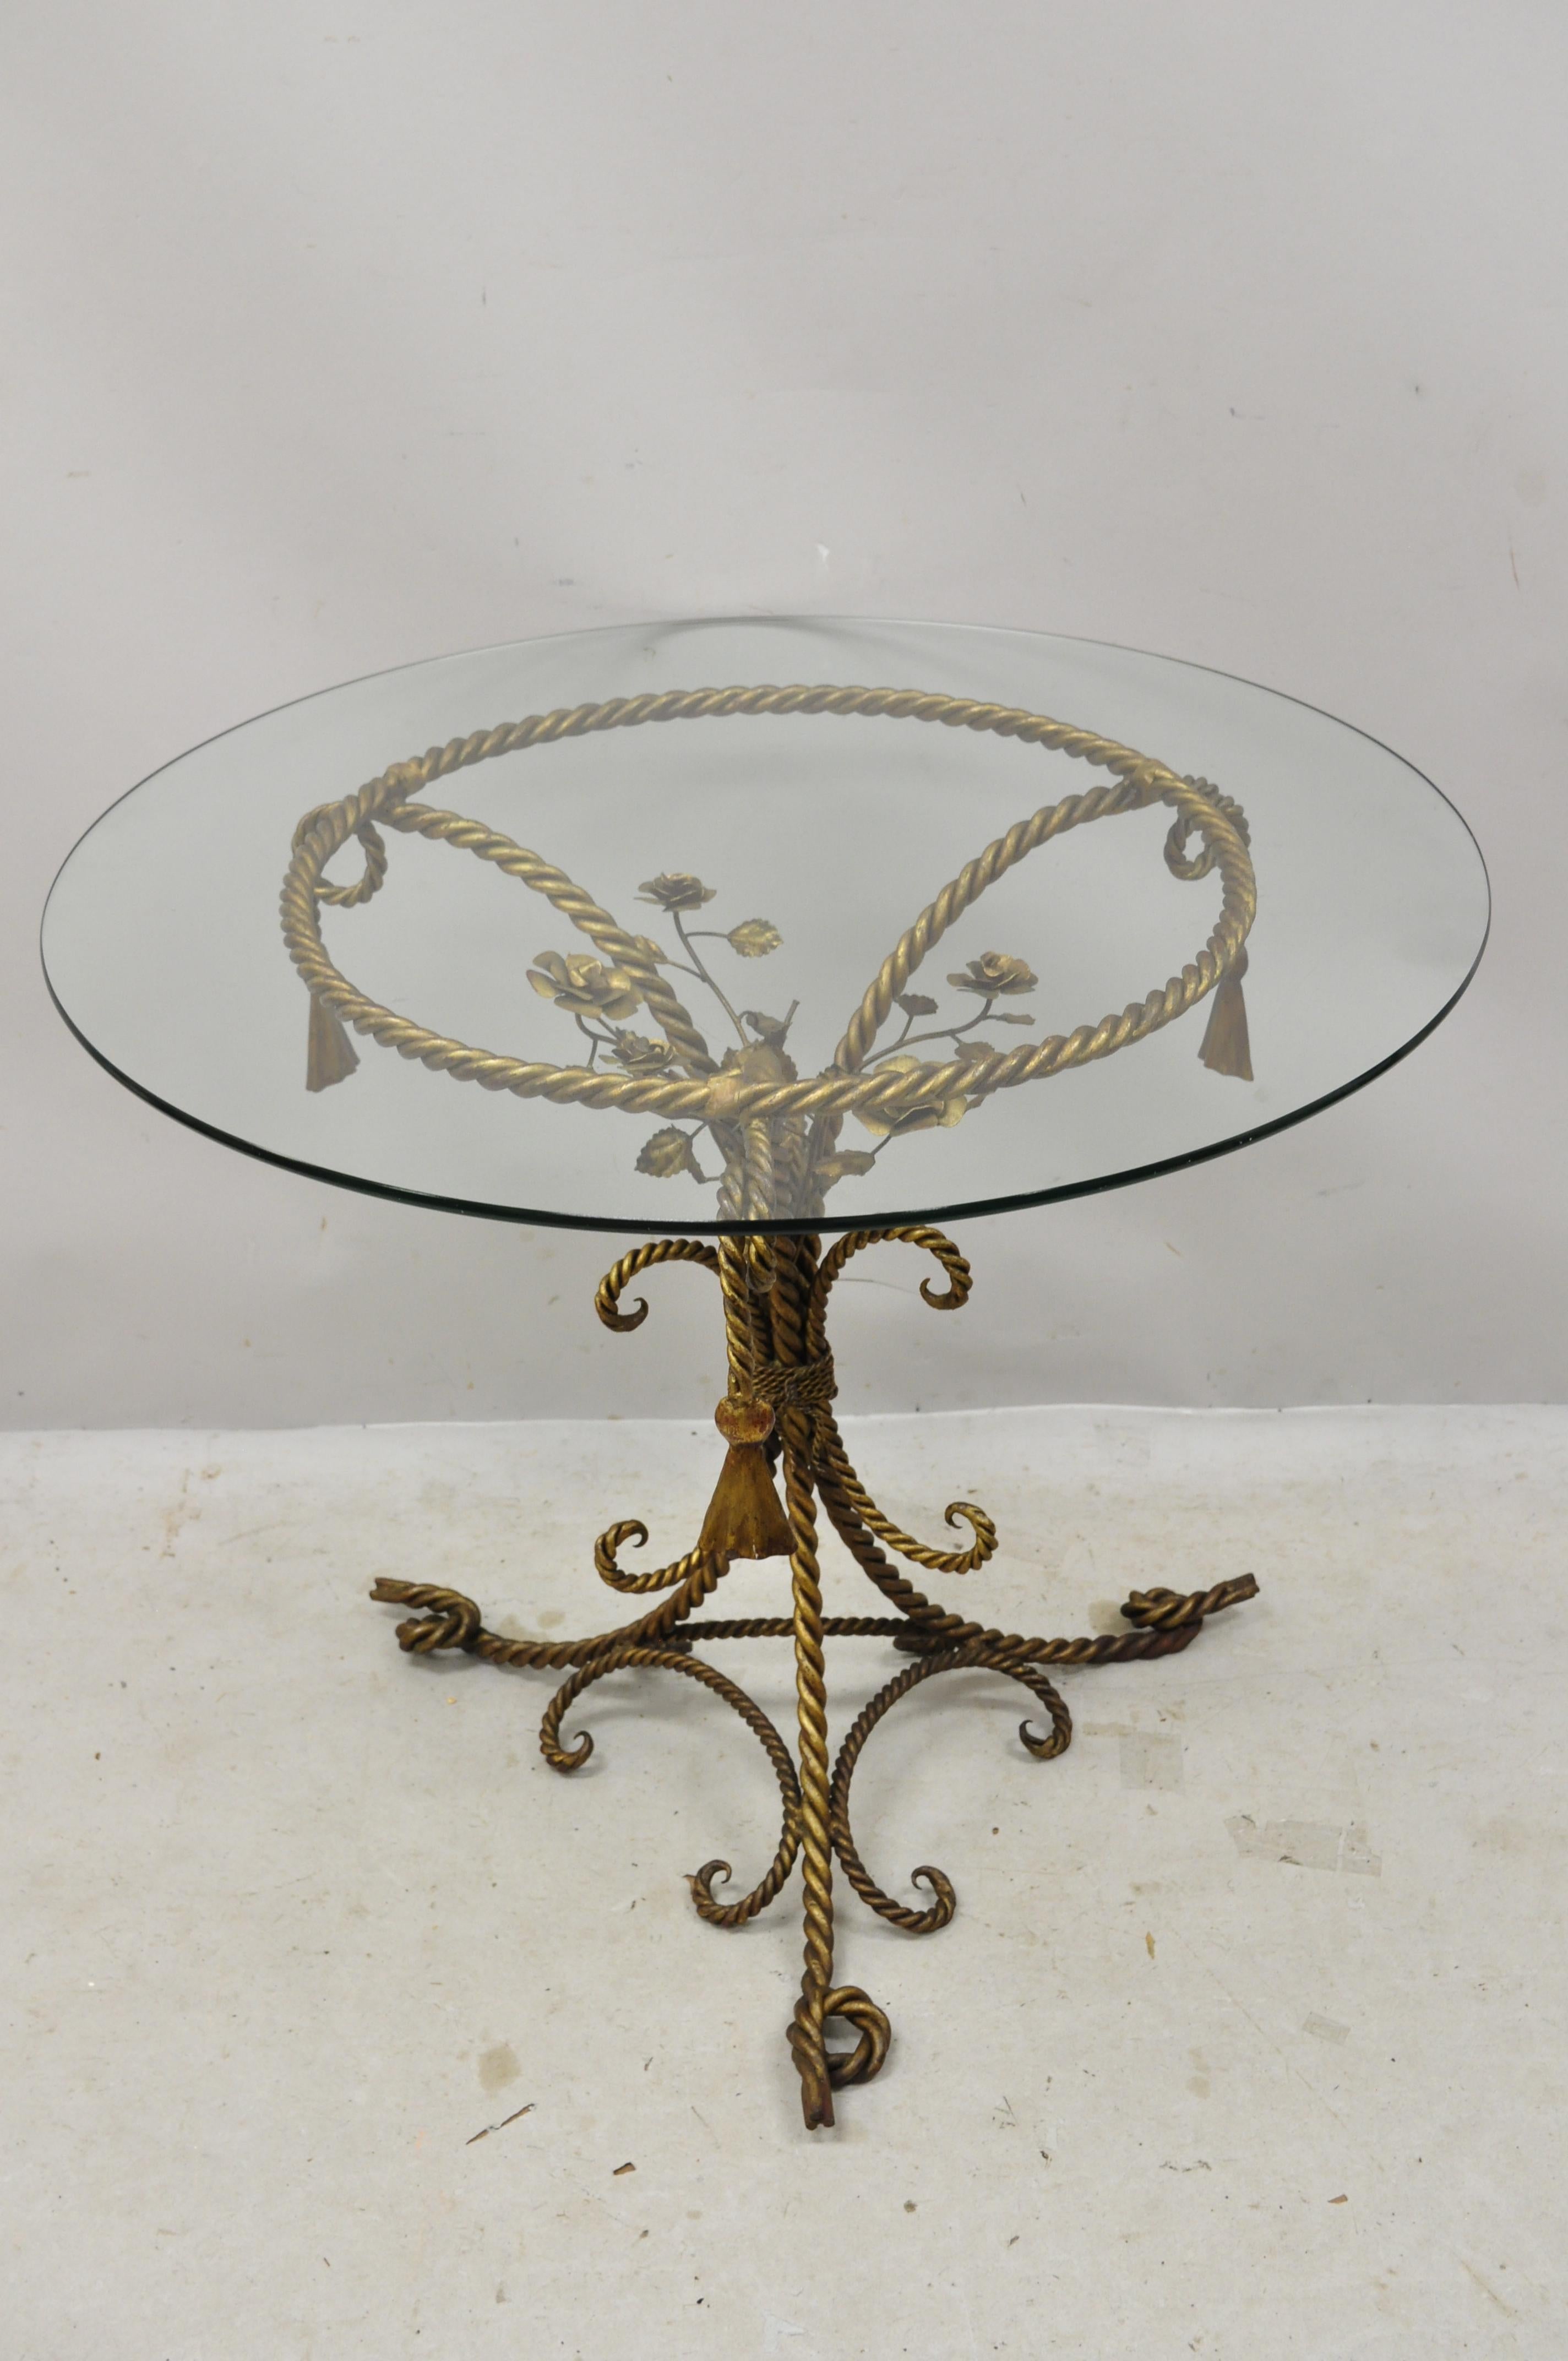 Italian Hollywood Regency gold gilt iron rope and tassel glass top center table. Item features heavy iron rope and tassel form pedestal base, round glass top, very nice vintage item, great style and form, circa early to mid-1900s.
Measurements: 30